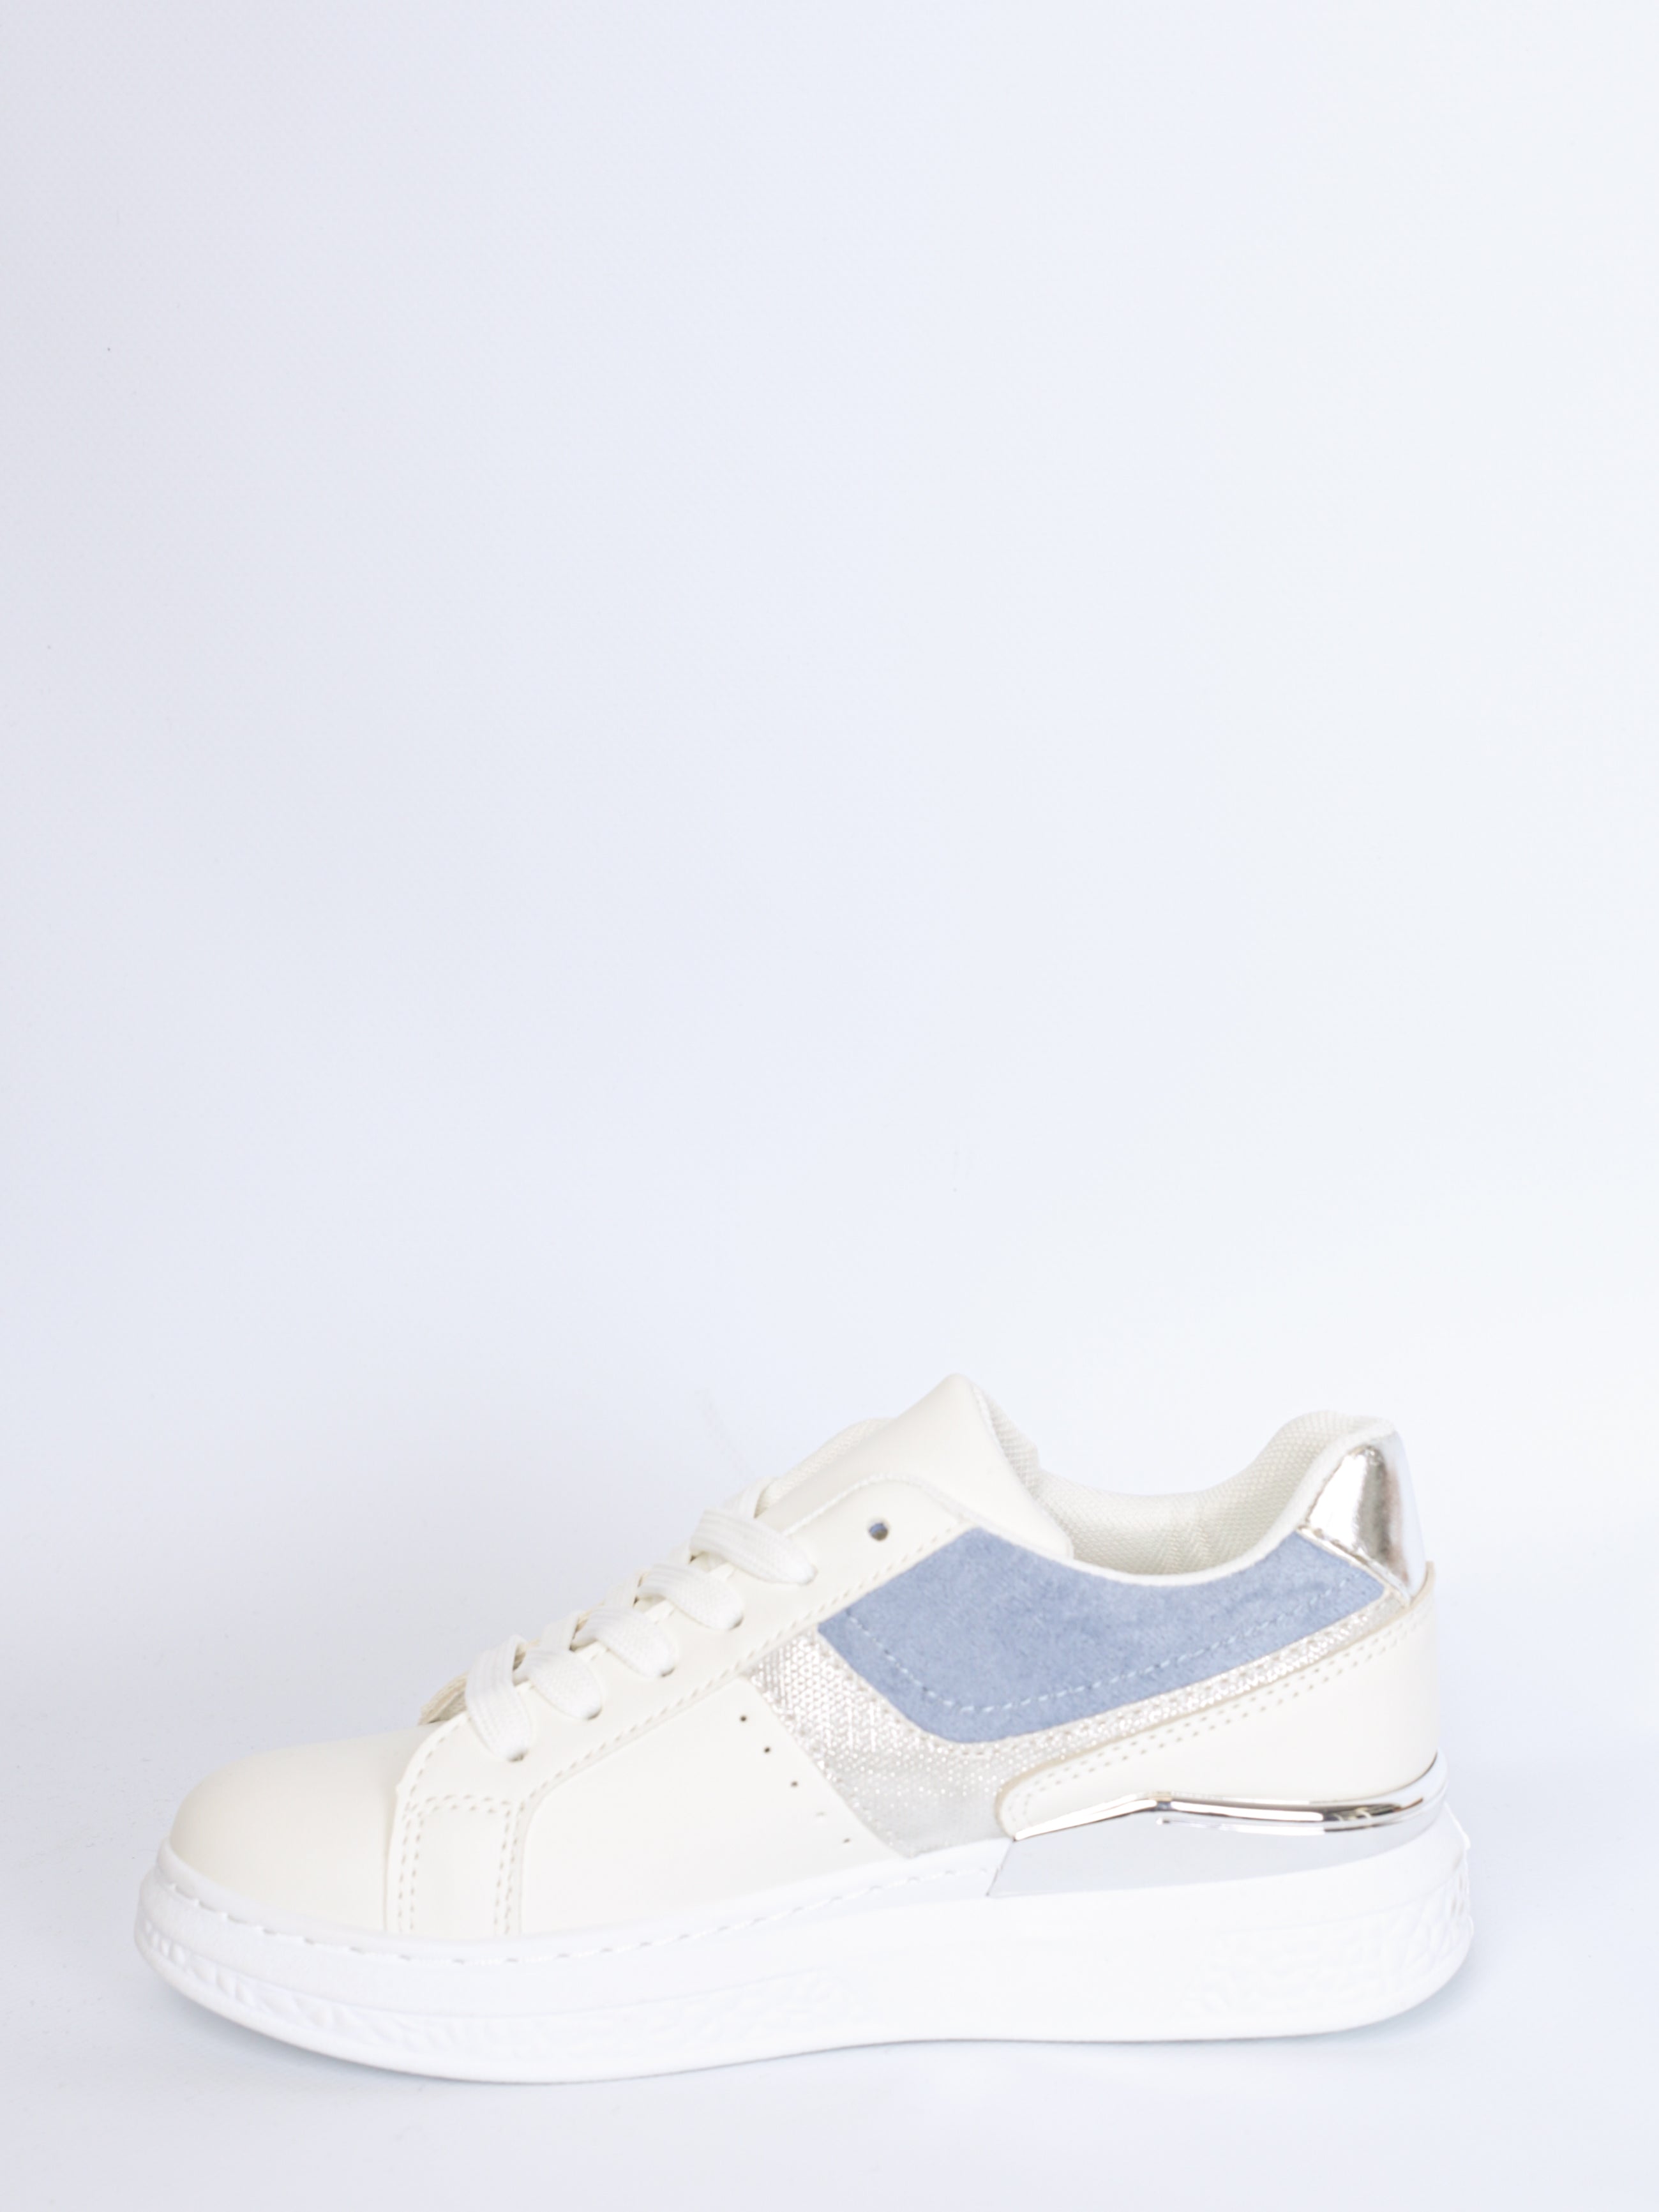 Sneakers with silver detail blue